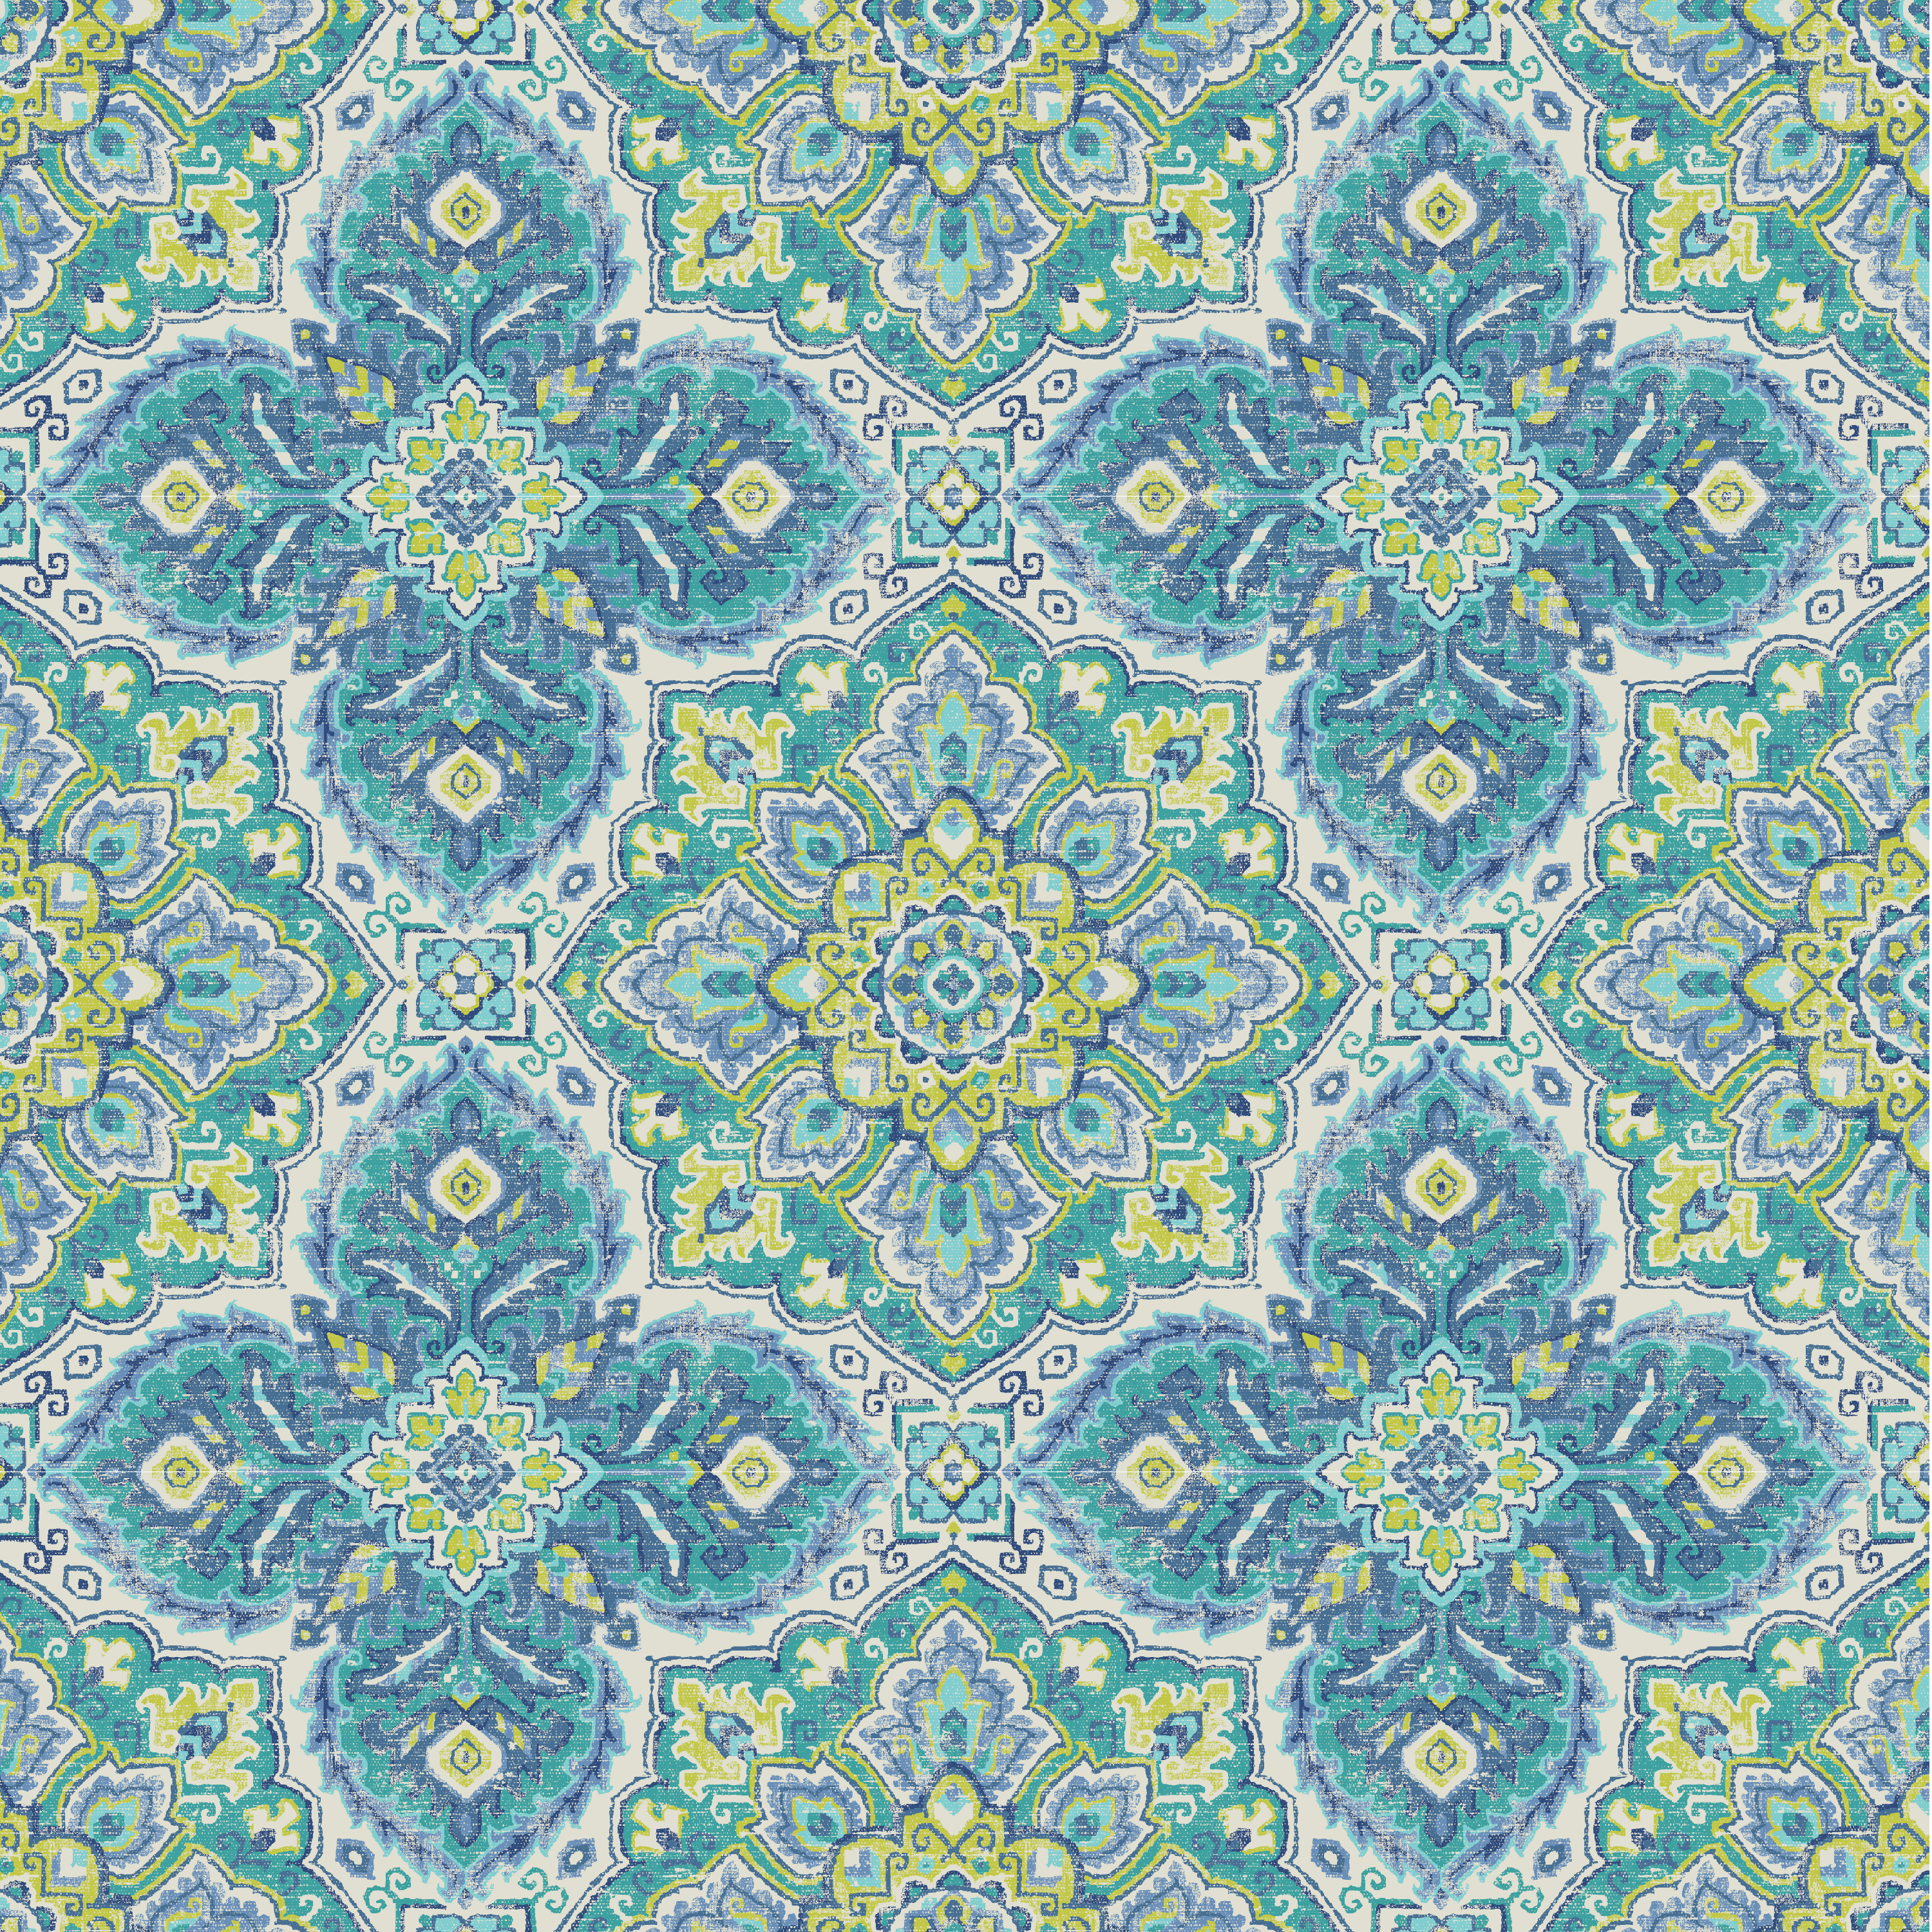 Waverly Inspirations 100% Cotton Colors 45" Tile Azure Color Sewing Fabric by the Yard